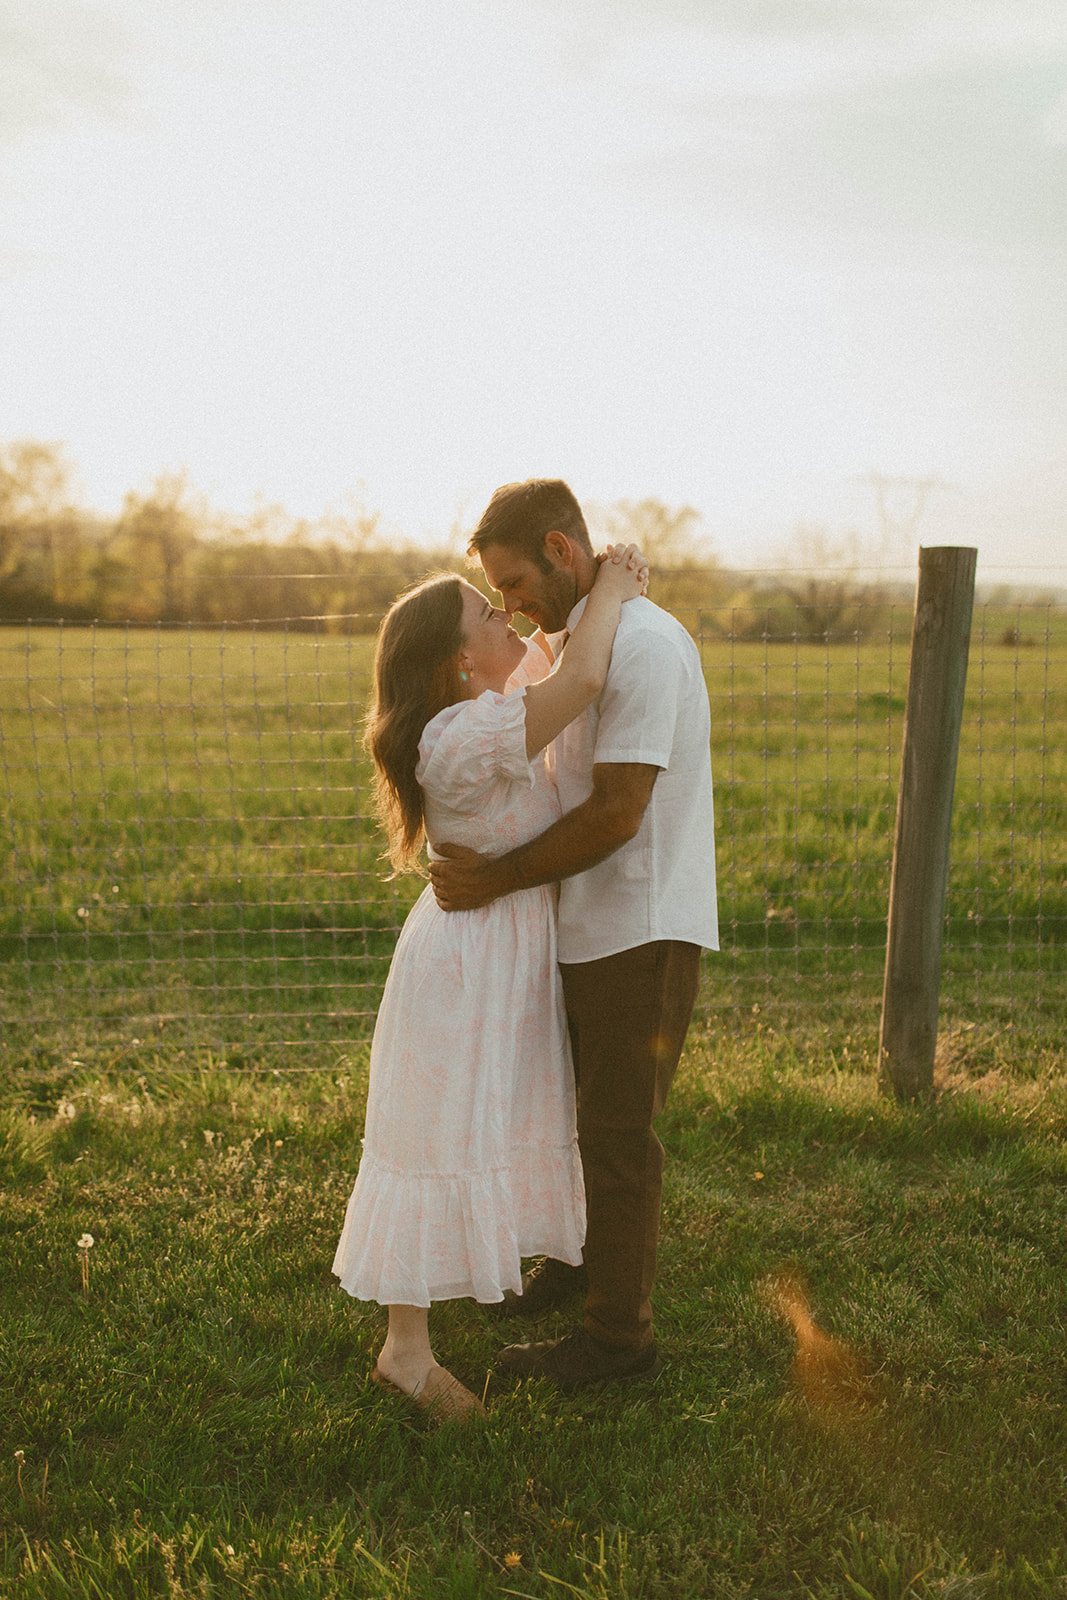 Couples photo shoot in a field